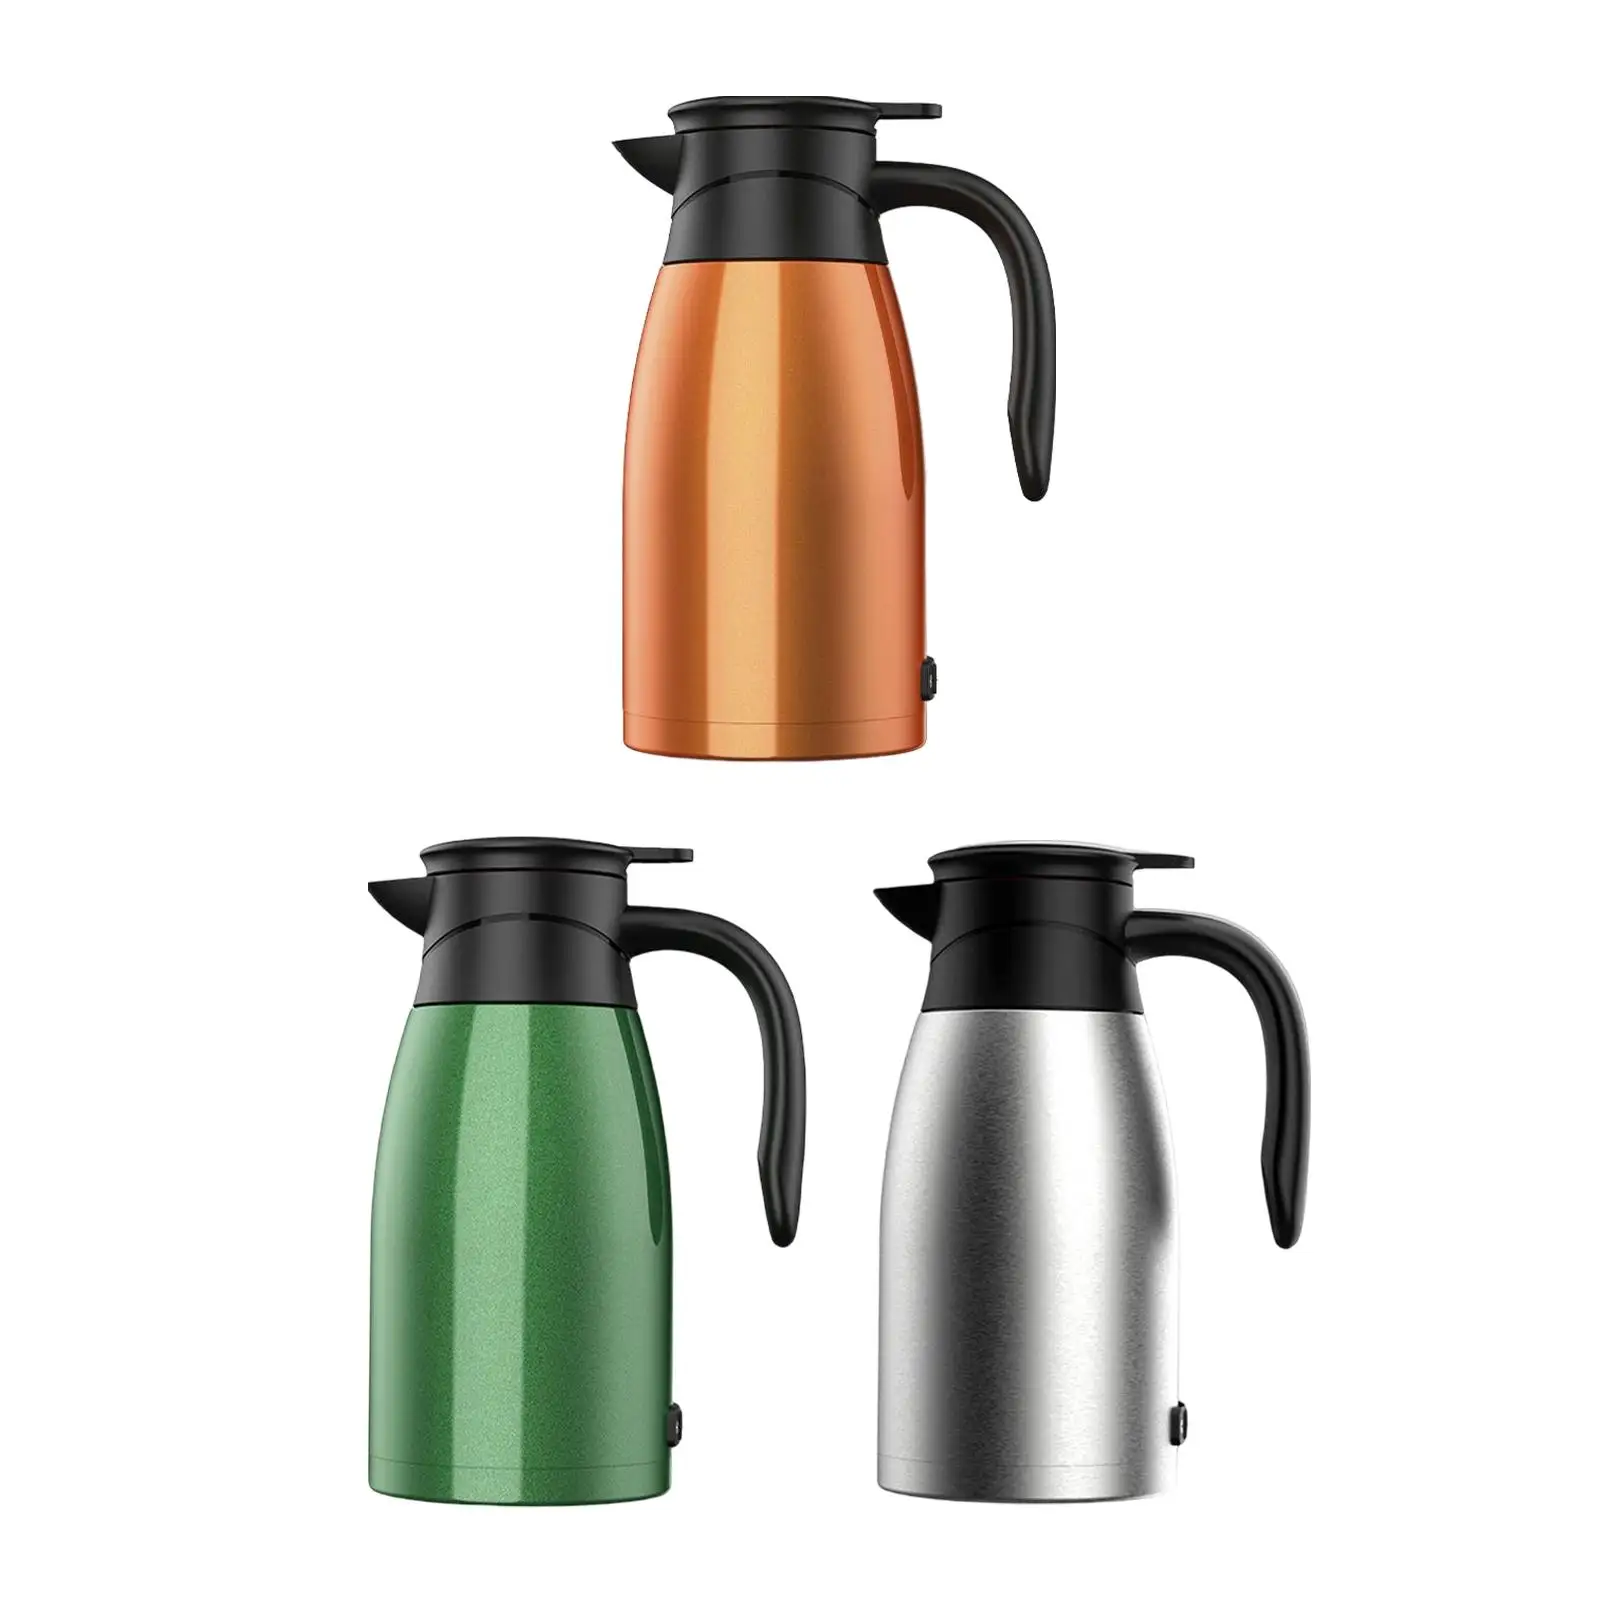 Portable 24 Truck Kettle Boiler Stainless Steel Insulated Temperature Display Heated Water Boiler for Coffee Travel Outdoor